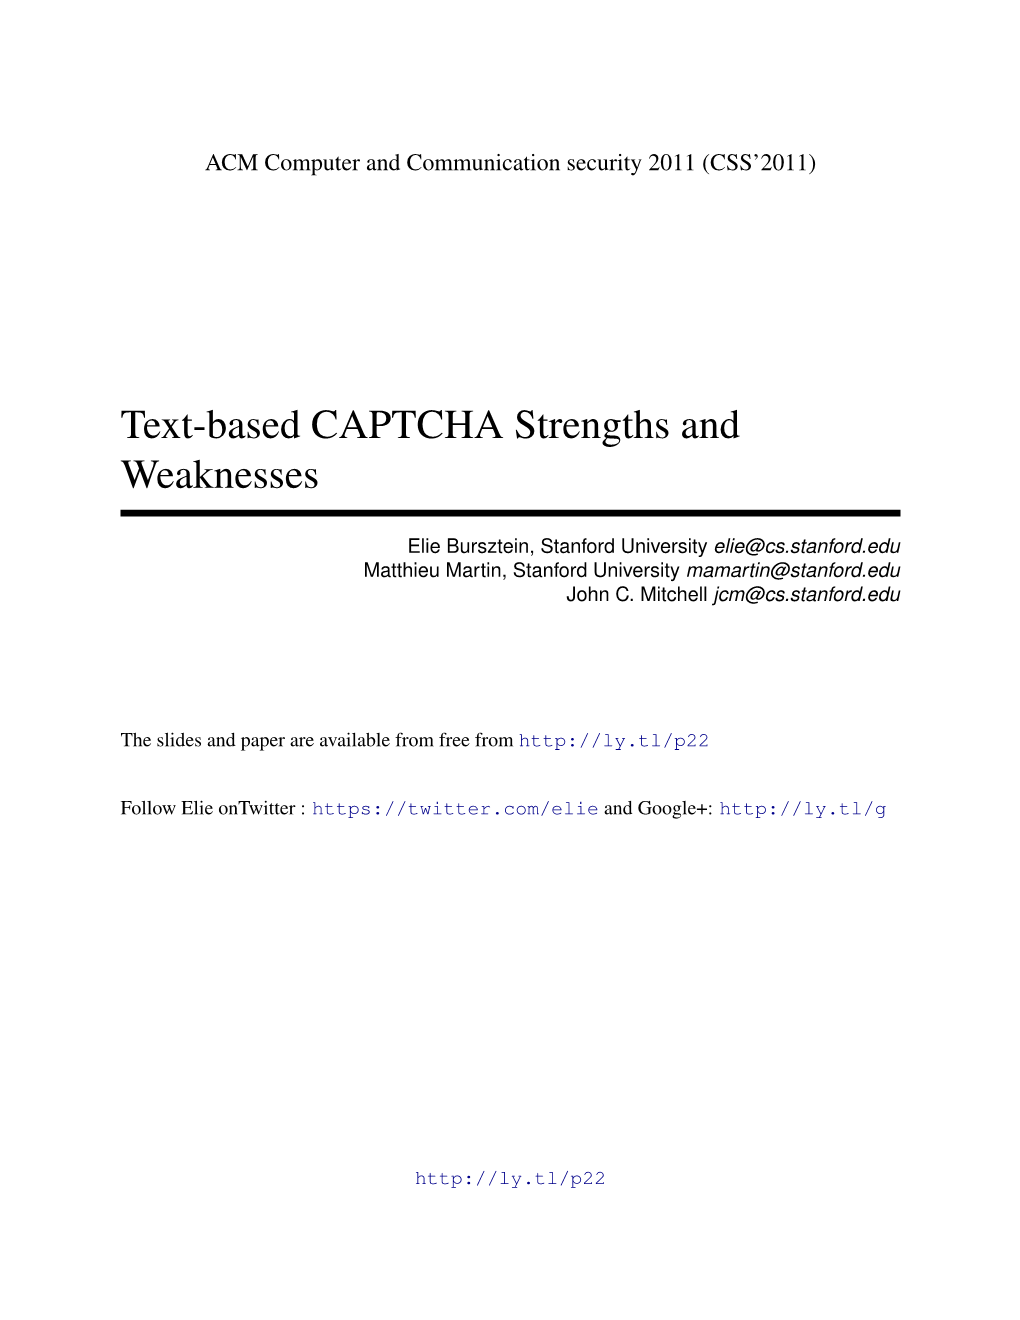 Text-Based CAPTCHA Strengths and Weaknesses